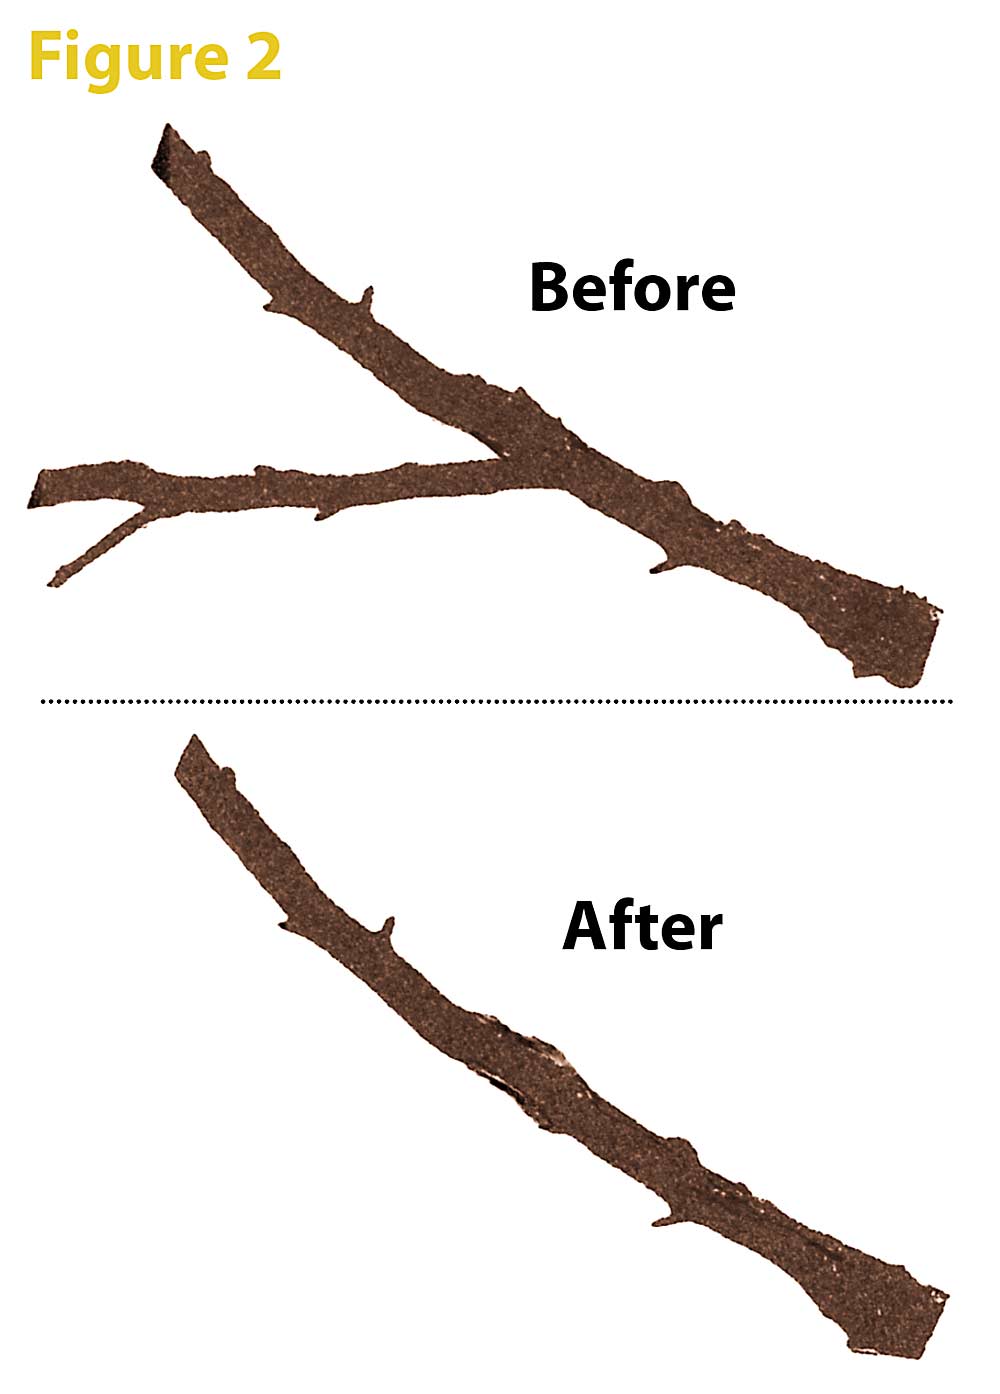 Figure 2: Singulate branch-on-branch or fork by making the thinning cut on the underside of the branch or scaffold. (Source: Bas van den Ende)